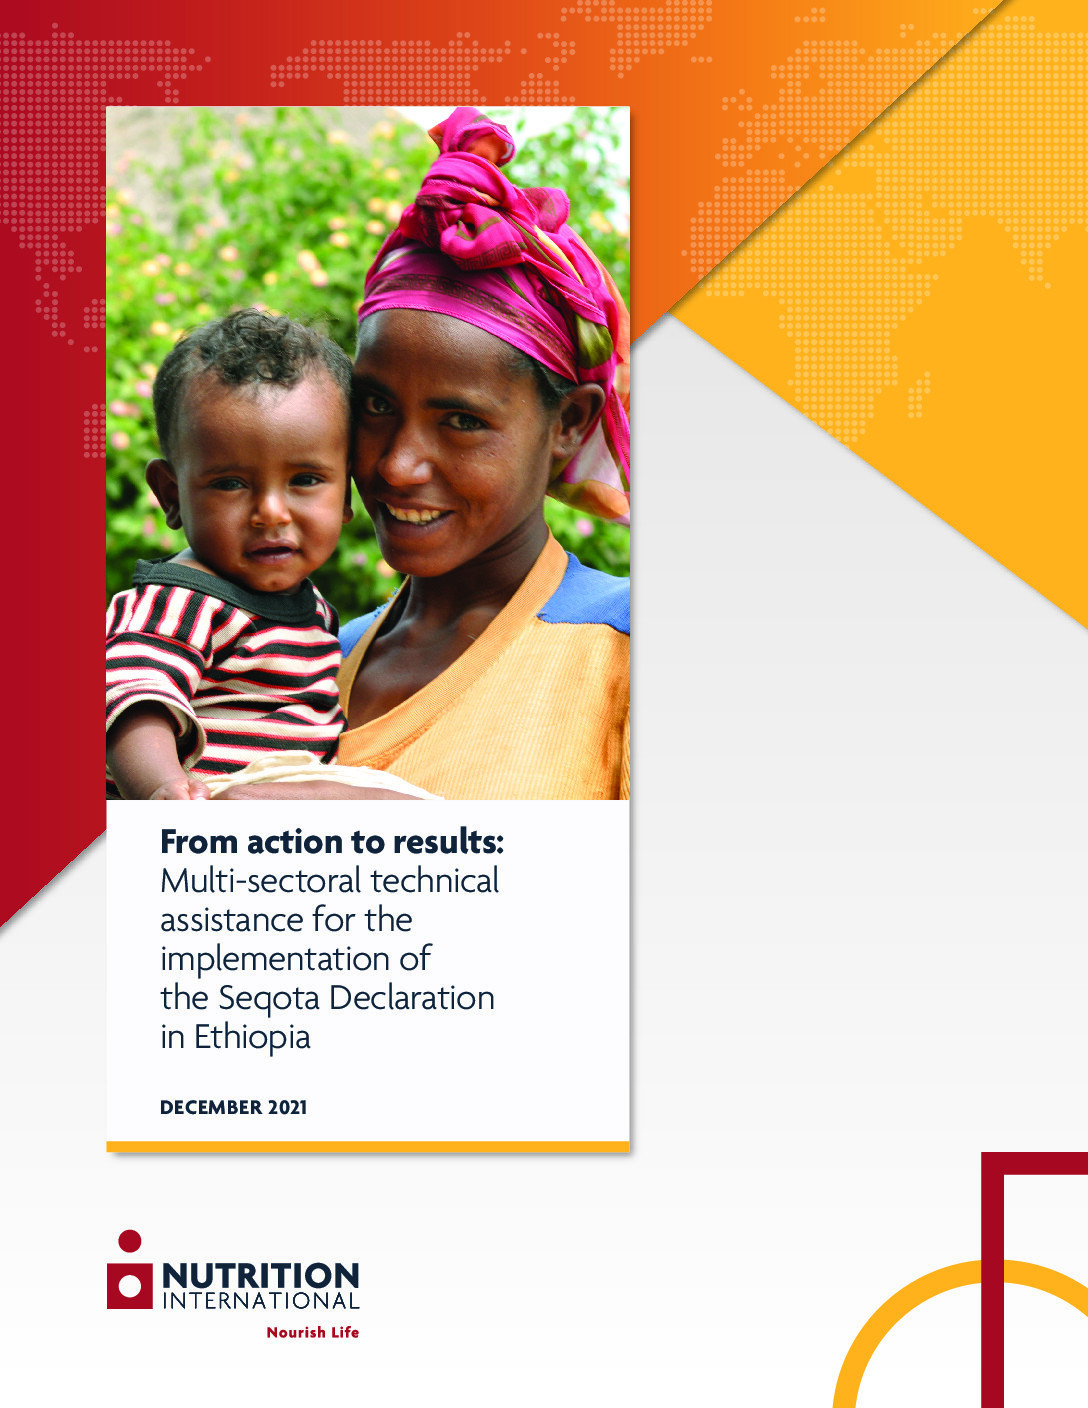 From action to results: Multi-sectoral technical assistance for the implementation of the Seqota Declaration in Ethiopia thumbnail